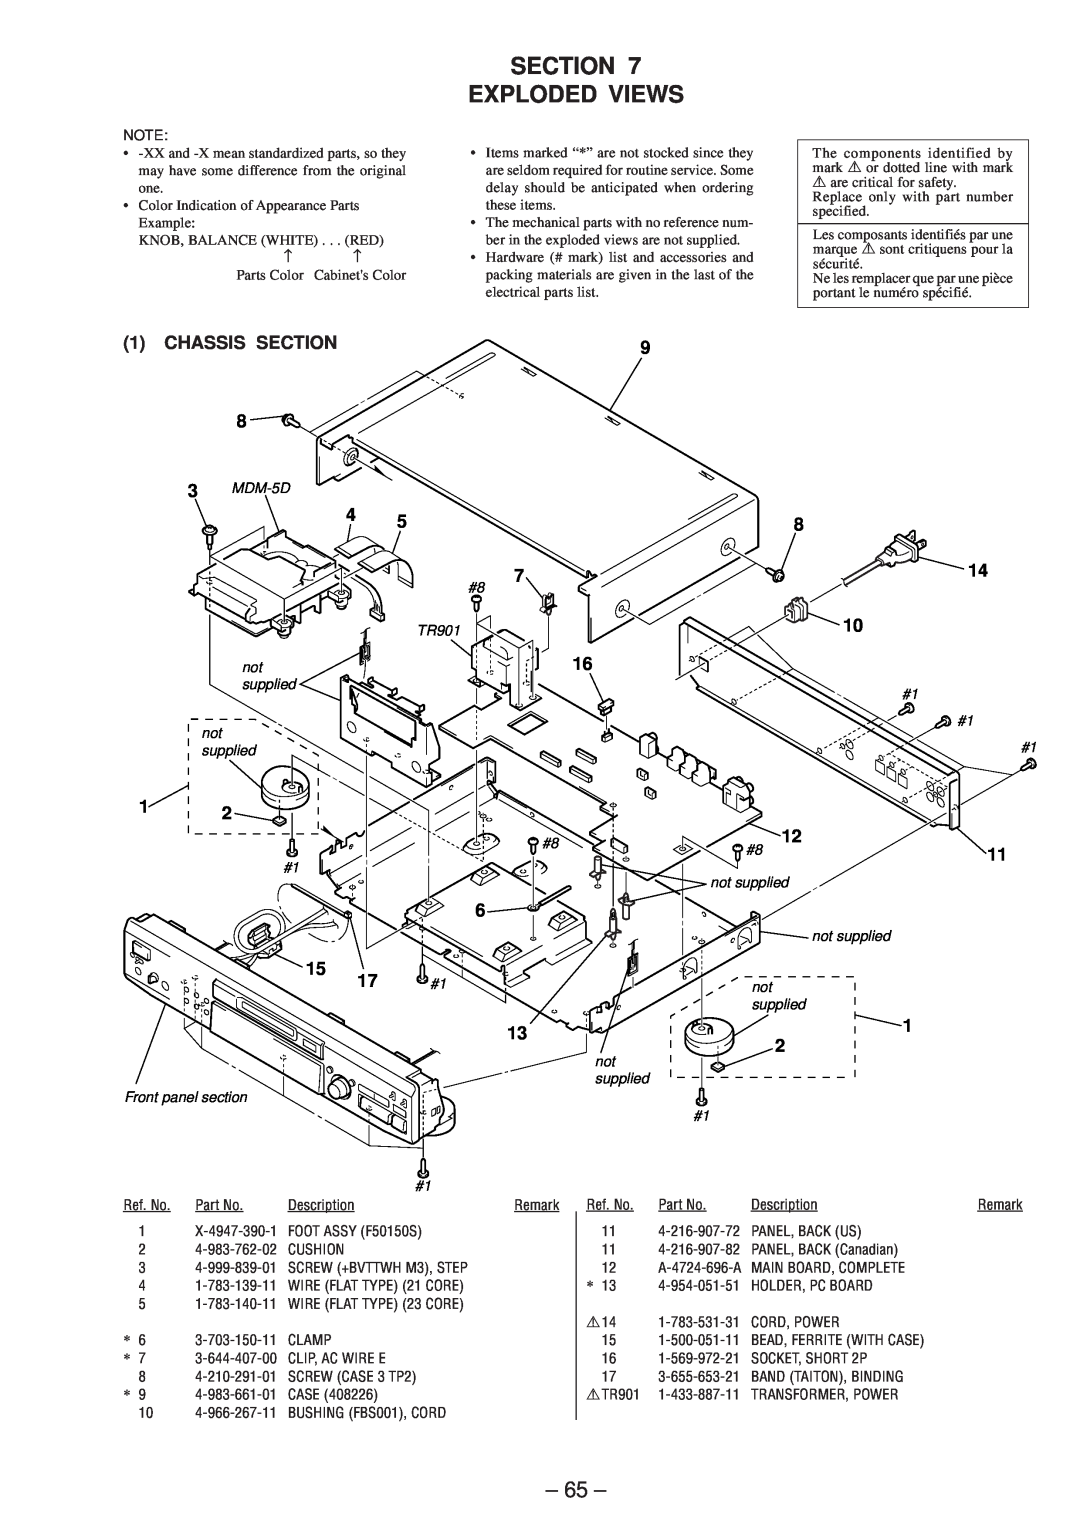 Sony MDS-JE630 service manual Section Exploded Views, Chassis Section, 6 17 #1 